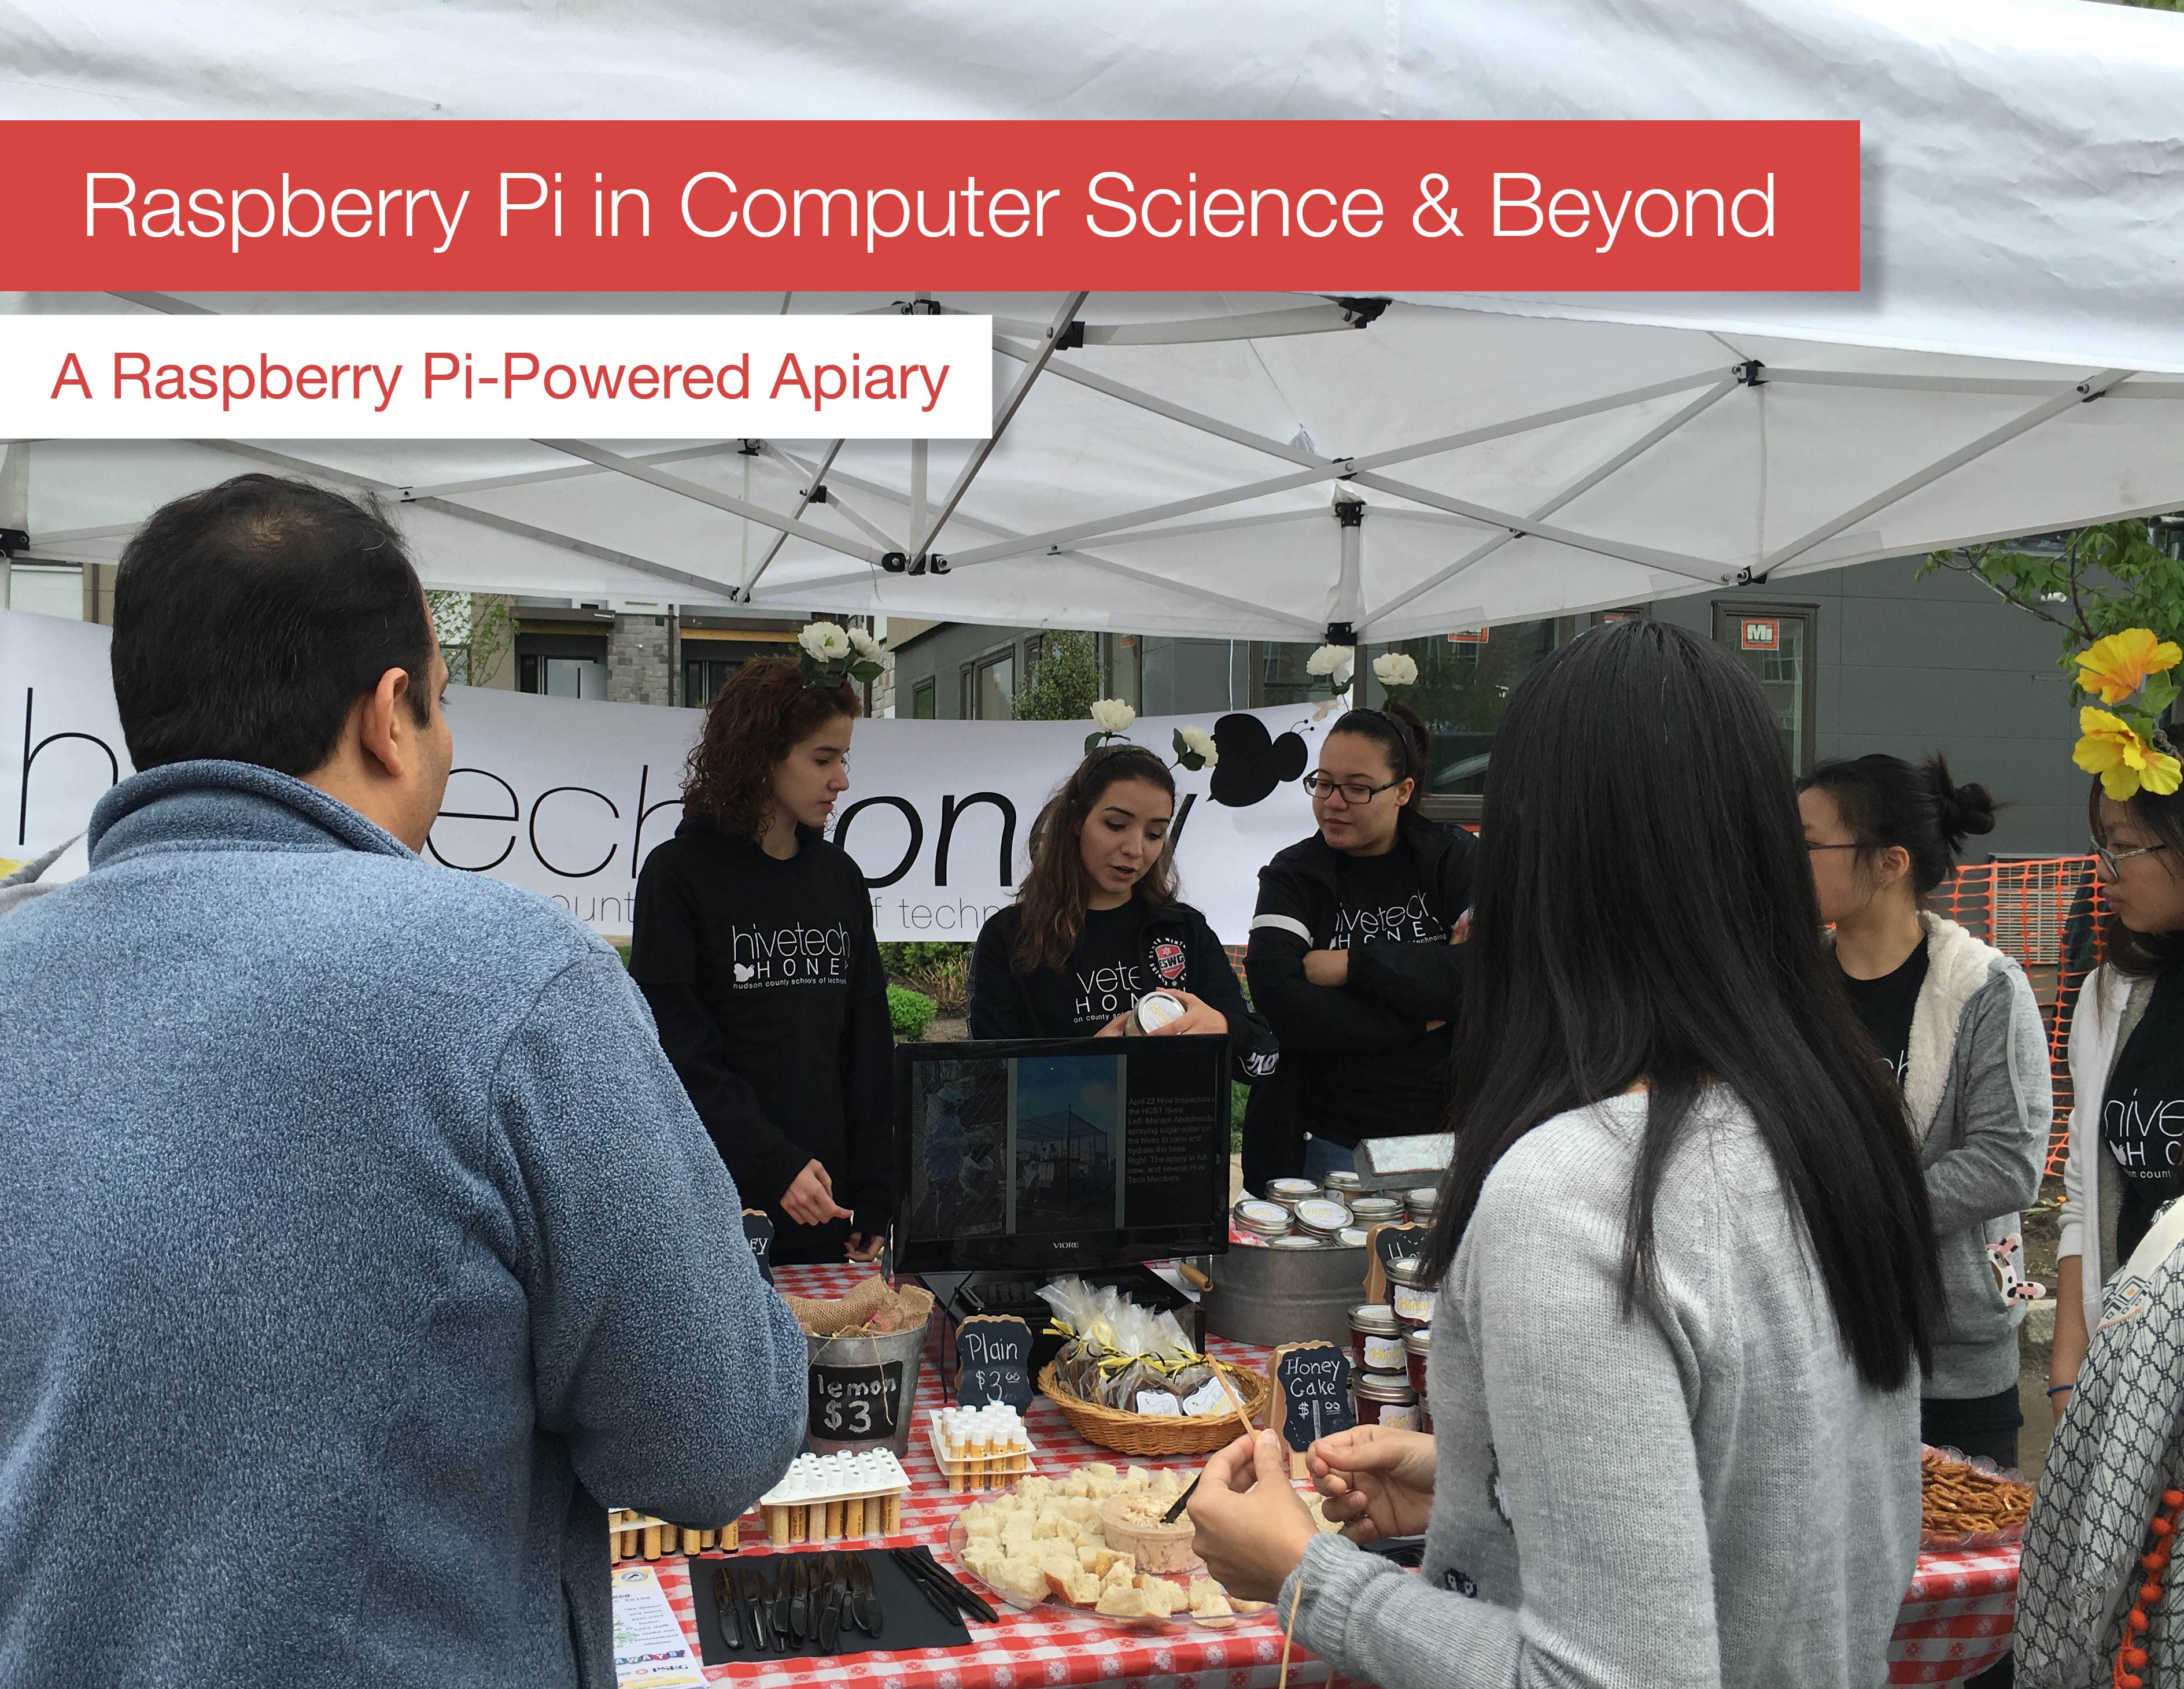 Raspberry Pi in CS and Beyond - the Making of a Raspberry Pi Powered Apiary